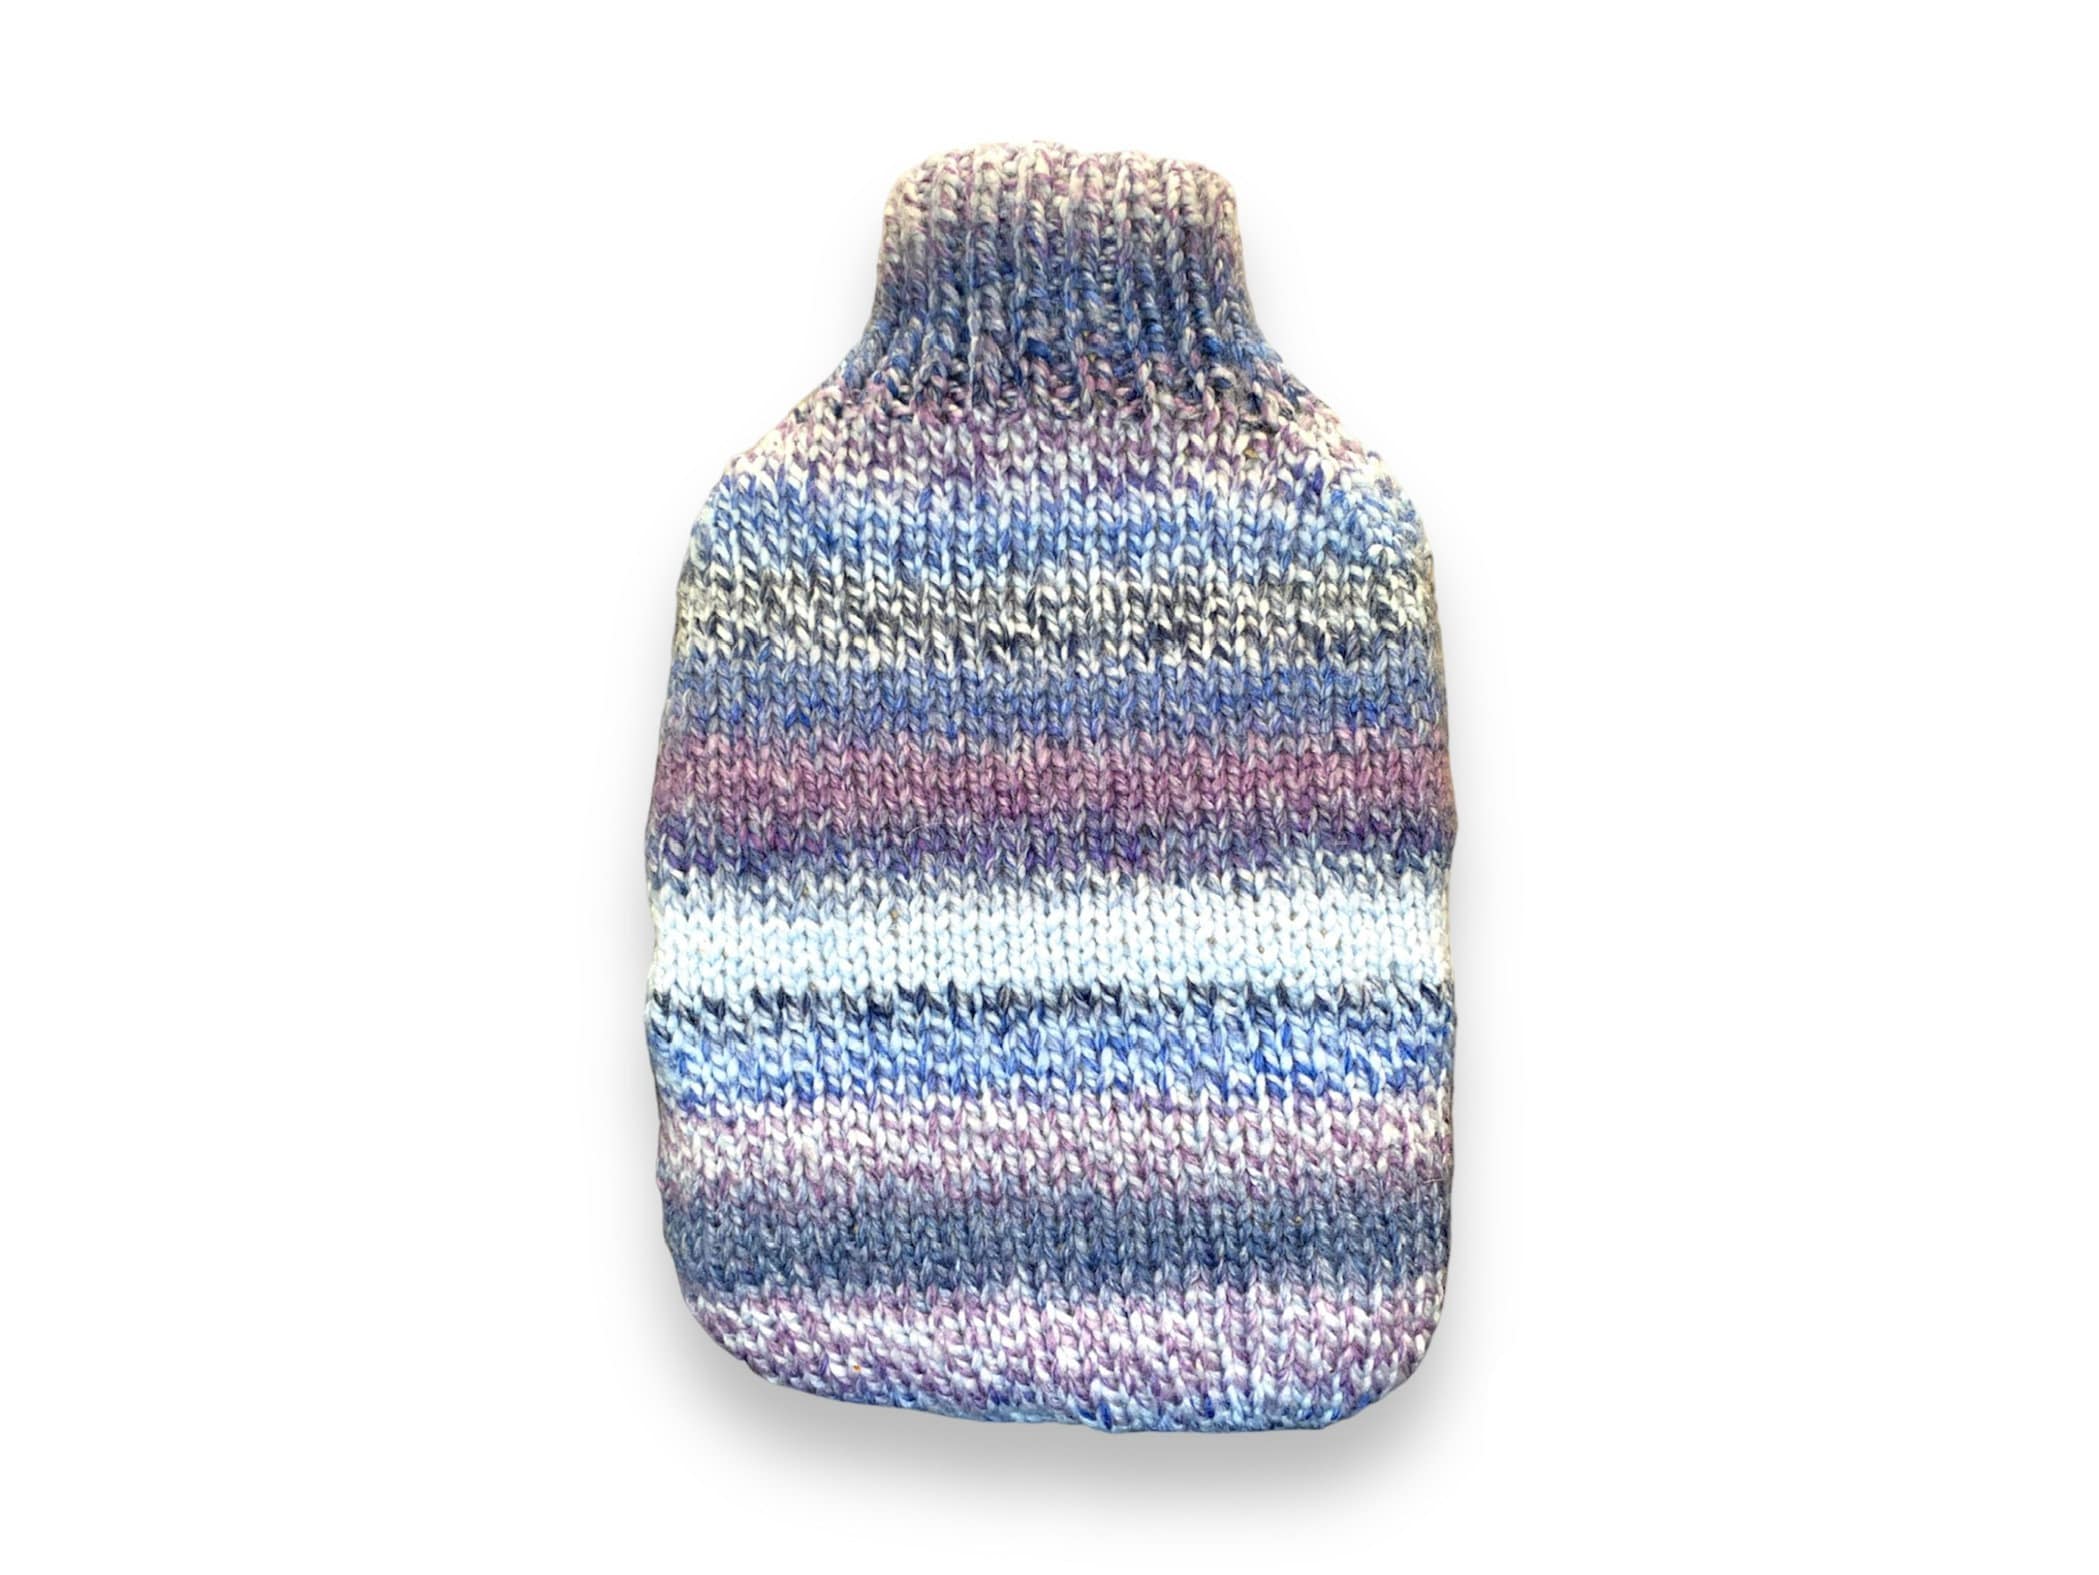 Dottie - Grey & Natural Knitted Hot Water Bottle Cover – Mason